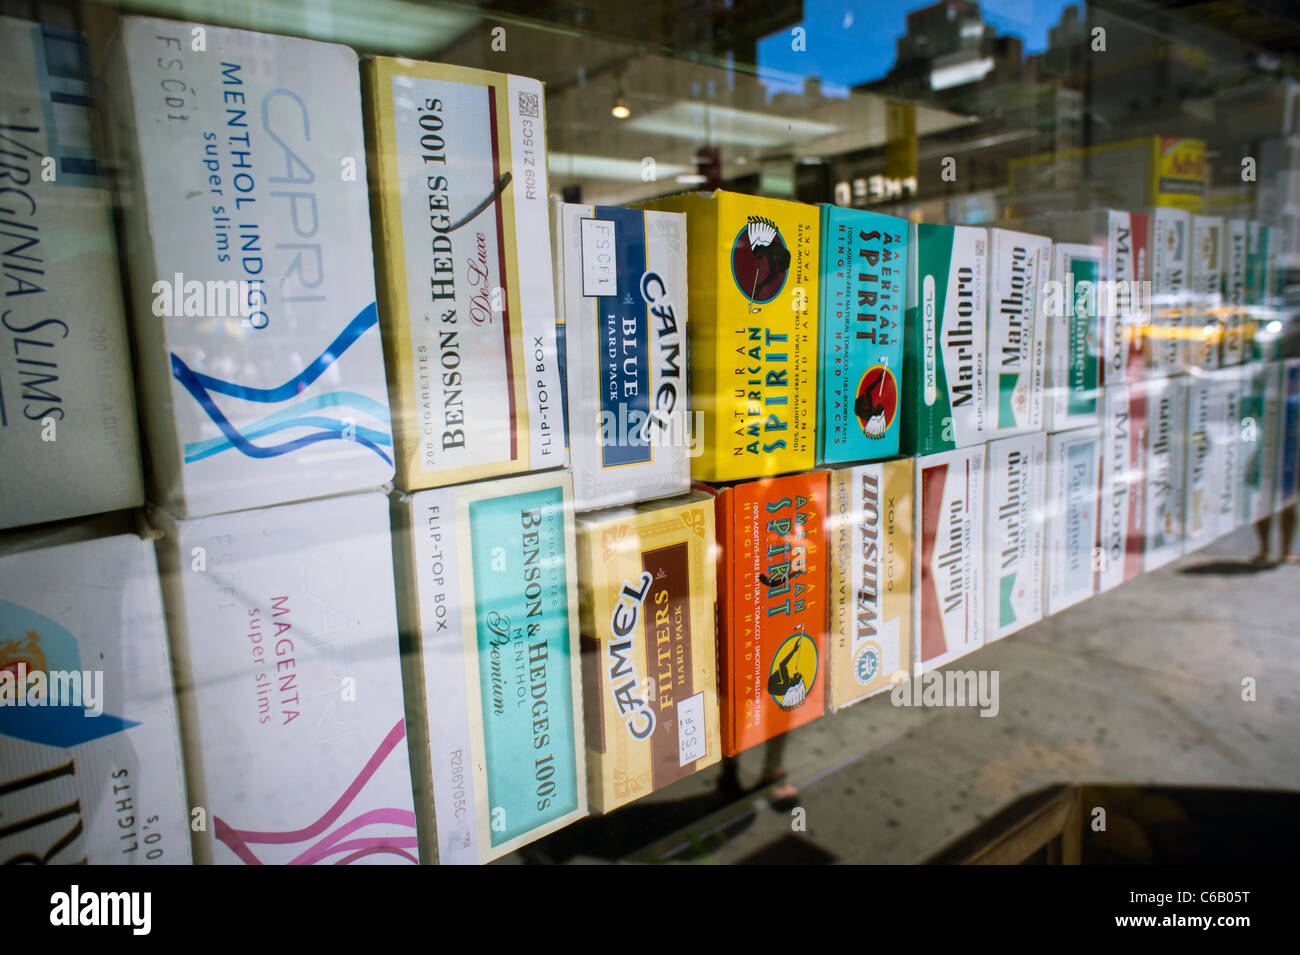 Cartons of cigarettes in the window of a grocery store in New York on Monday, August 22, 2011. (© Richard B. Levine) Stock Photo